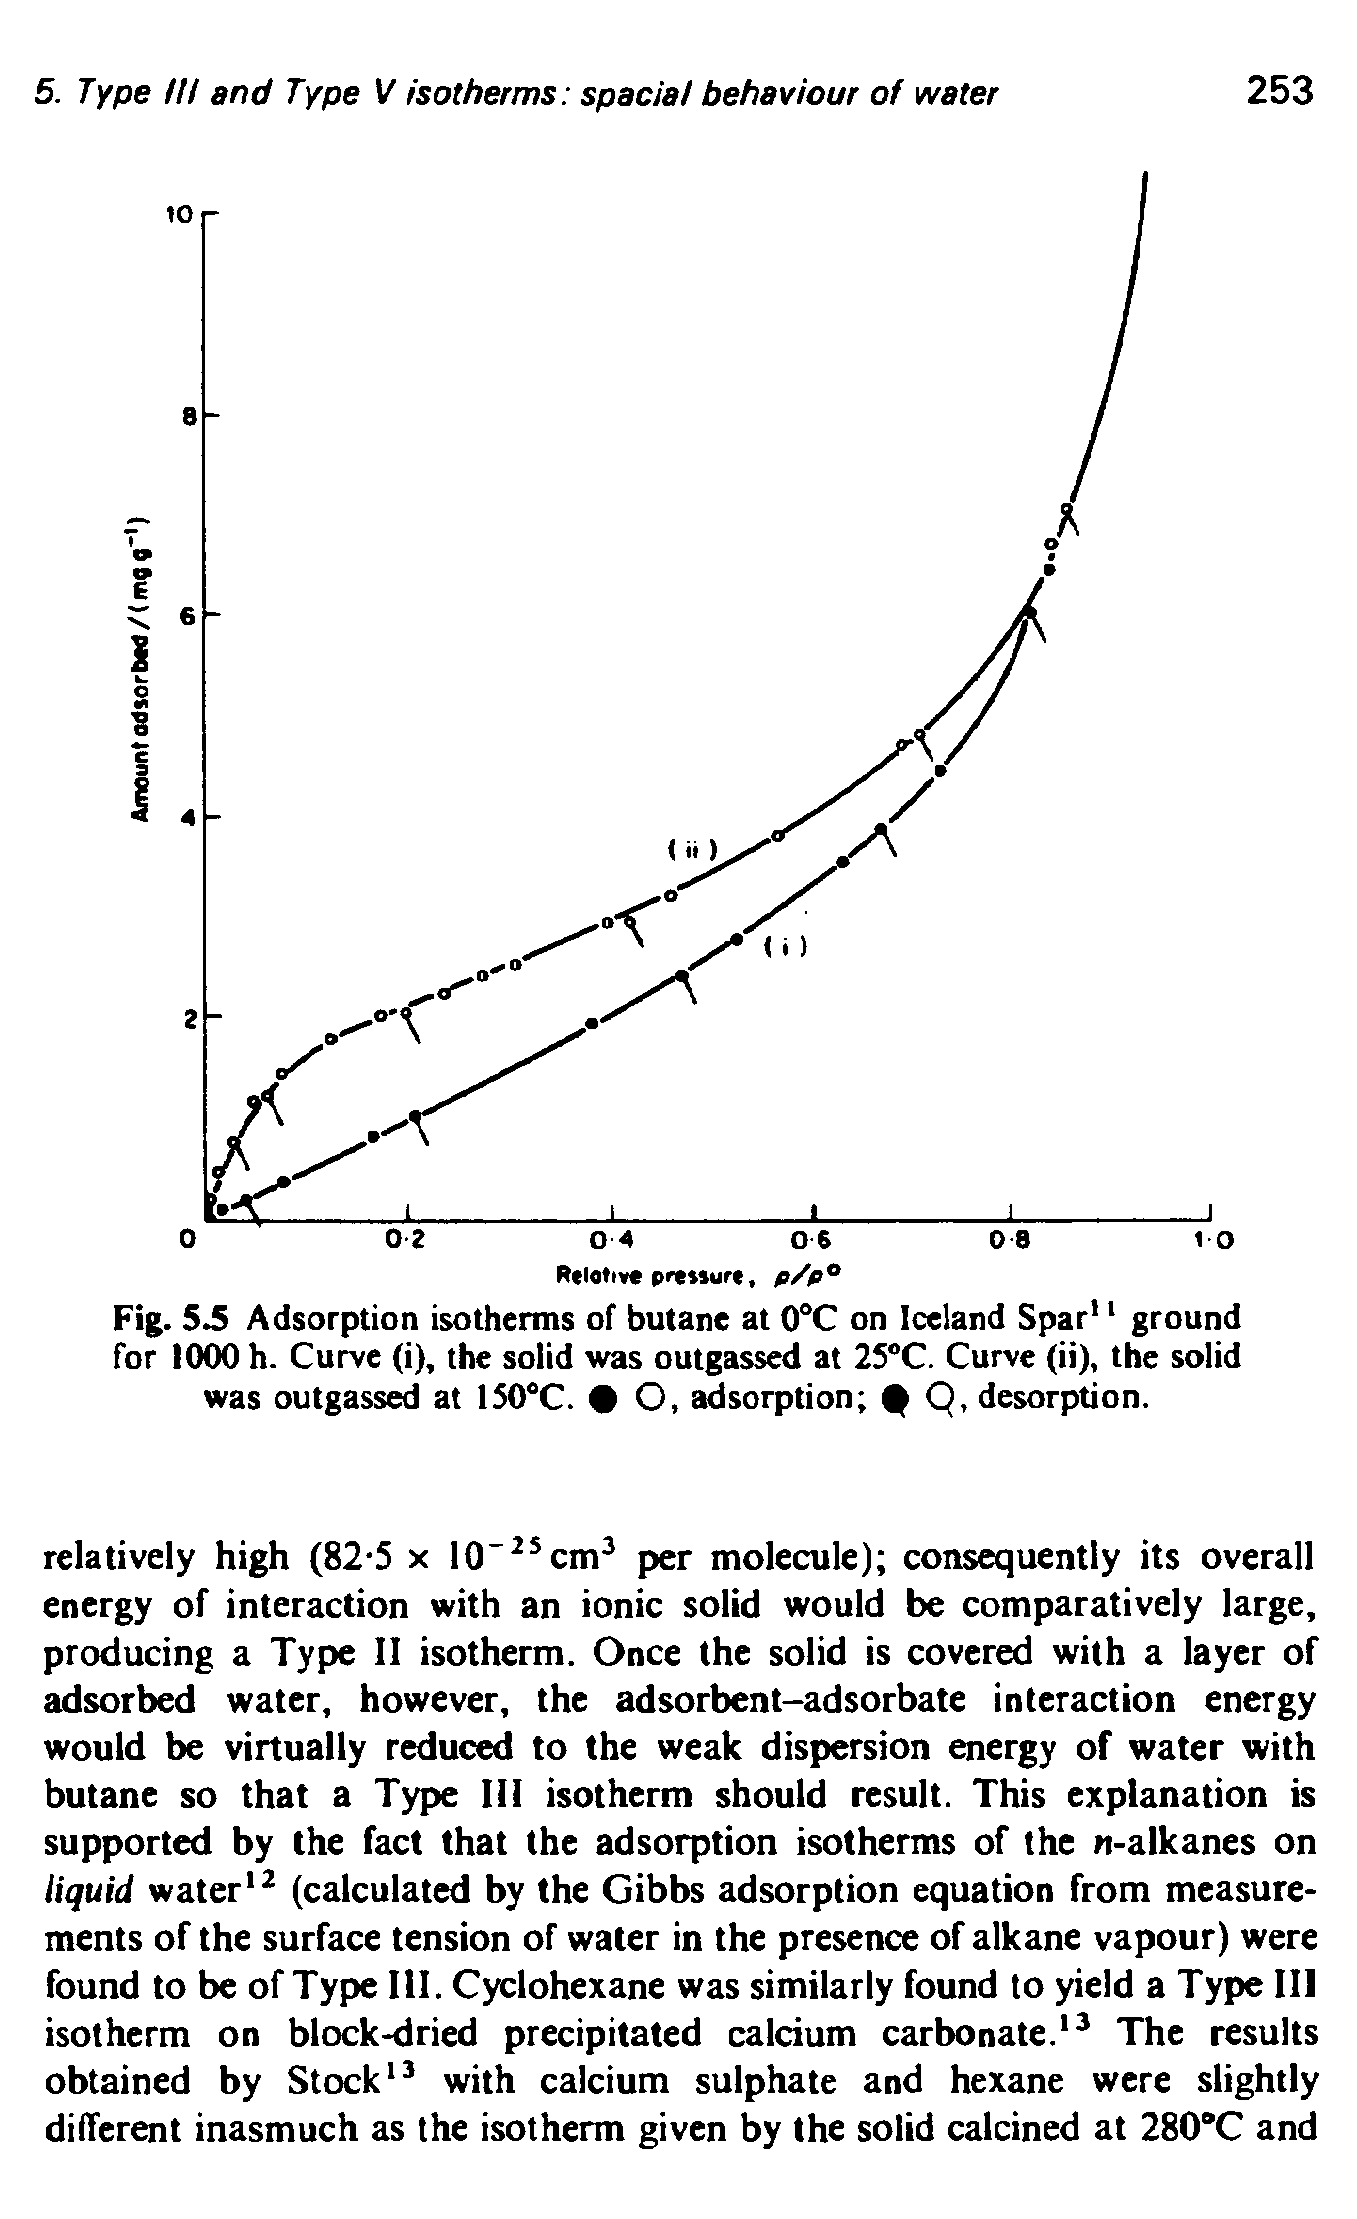 Fig. 5.5 Adsorption isotherms of butane at 0°C on Iceland Spar ground for 1000 h. Curve (i), the solid was outgassed at 25°C. Curve (ii), the solid was outgassed at 1S0°C. O, adsorption p Q, desorption.